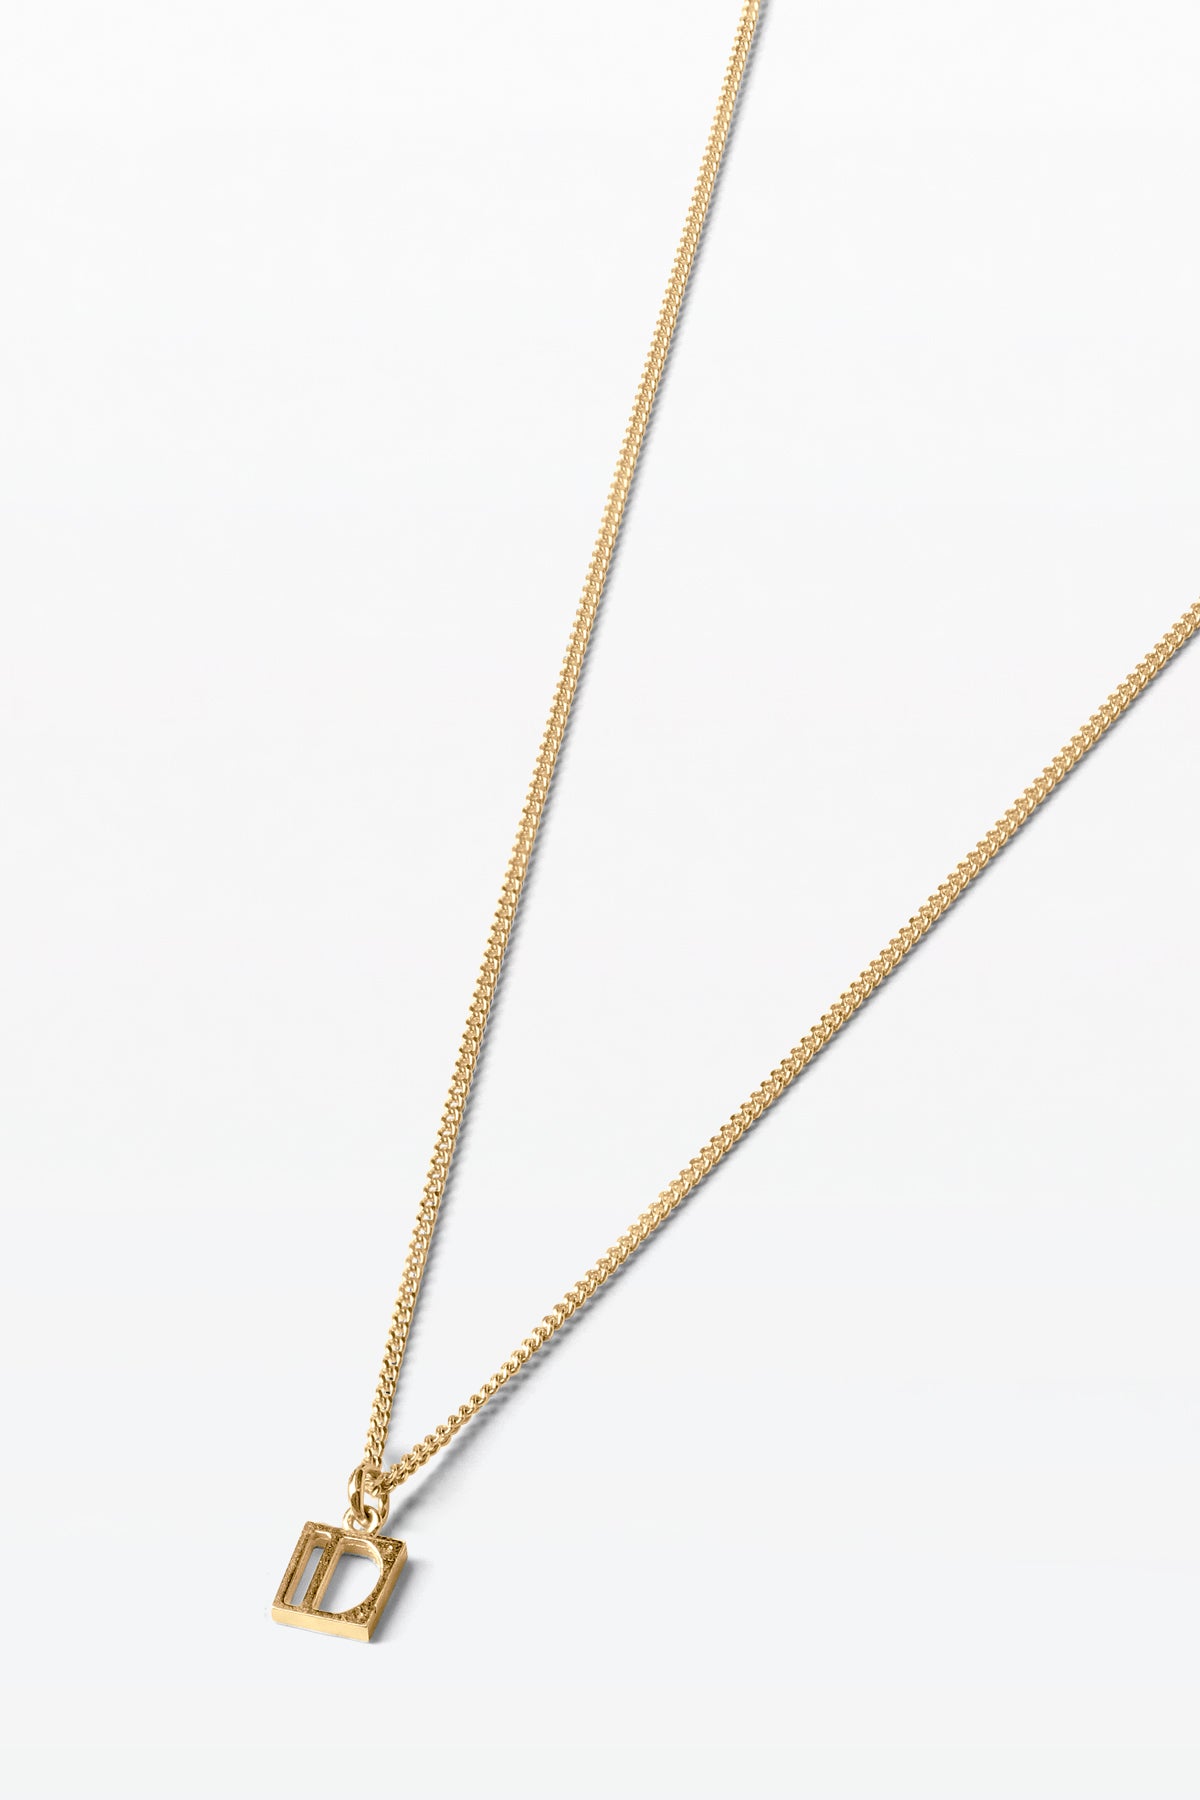 Arven Necklace 02 Gold Plated Silver - 60cm